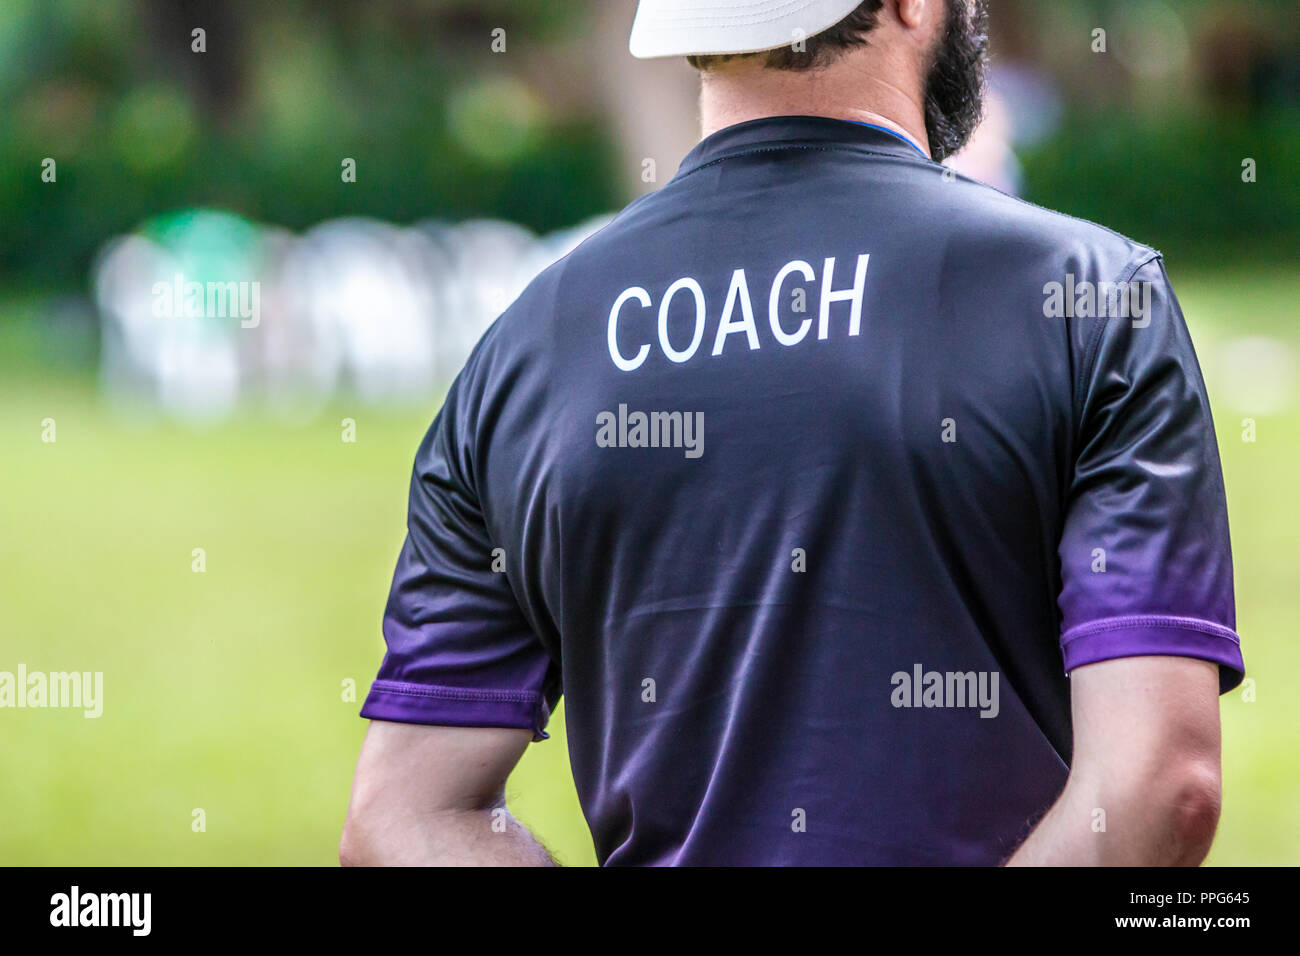 Back view of male soccer or football coach in dark shirt with word COACH written on back, standing on the sideline watching his team play, good for sp Stock Photo